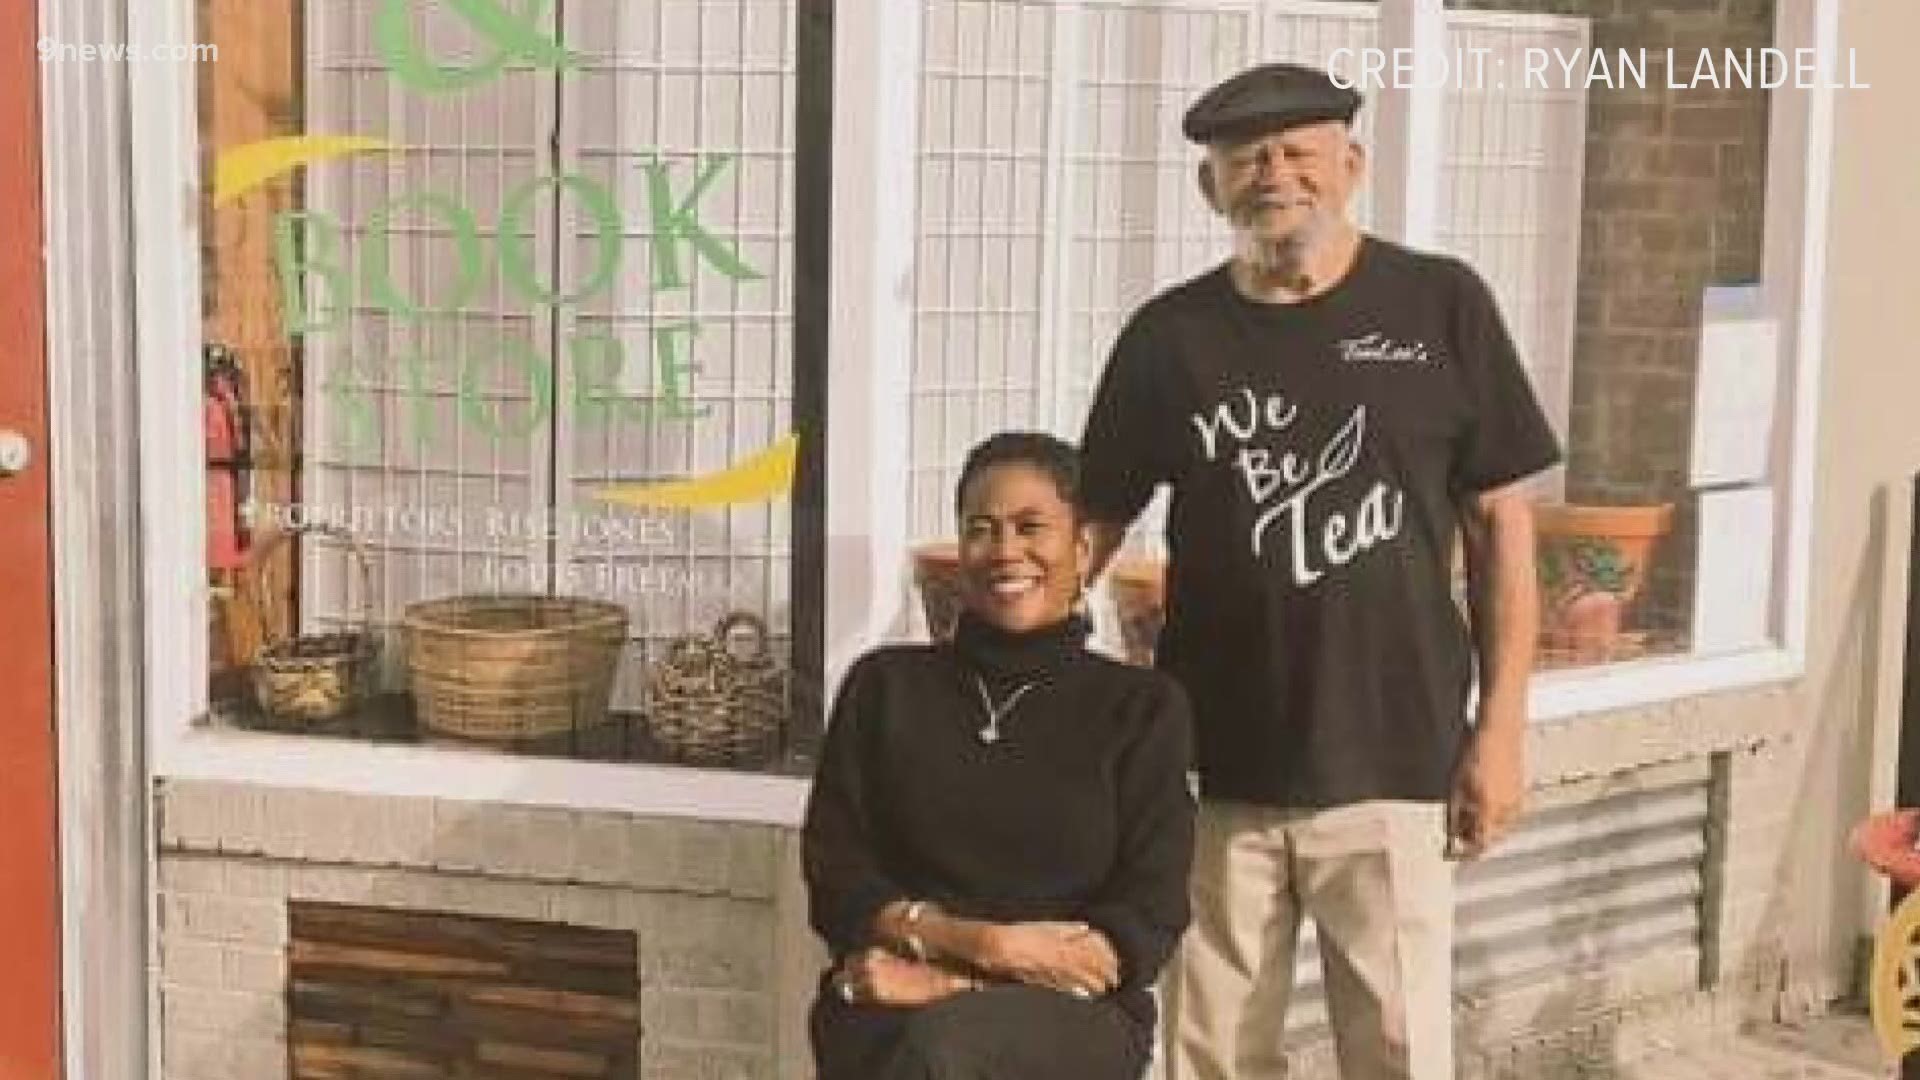 Louis Freeman founded the former Hue-Man Experience Book Store and TeaLee's TeaHouse in Five Points.